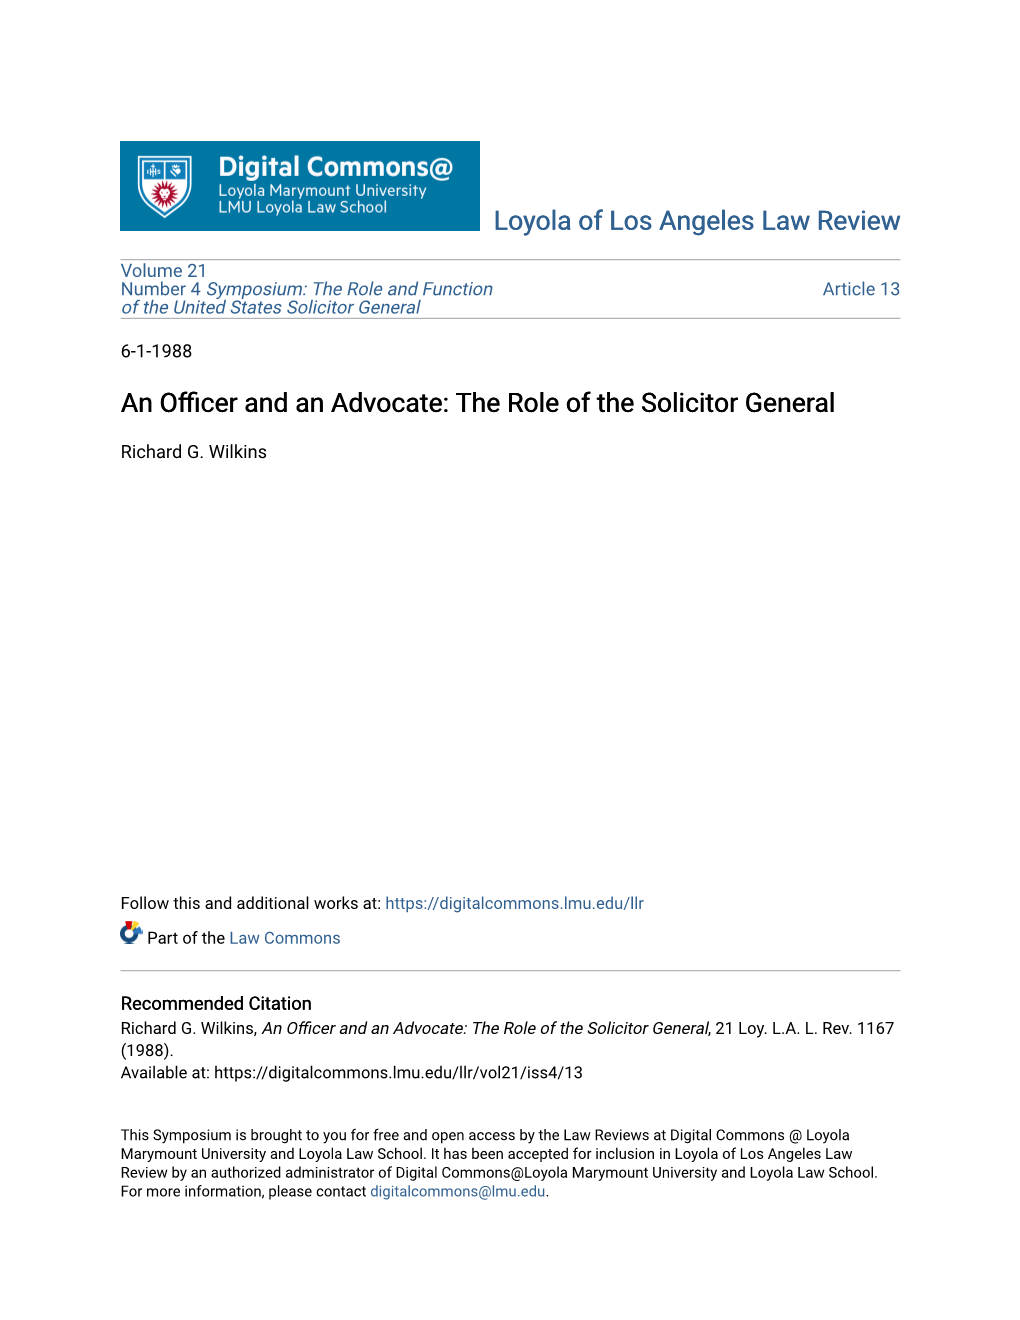 The Role of the Solicitor General